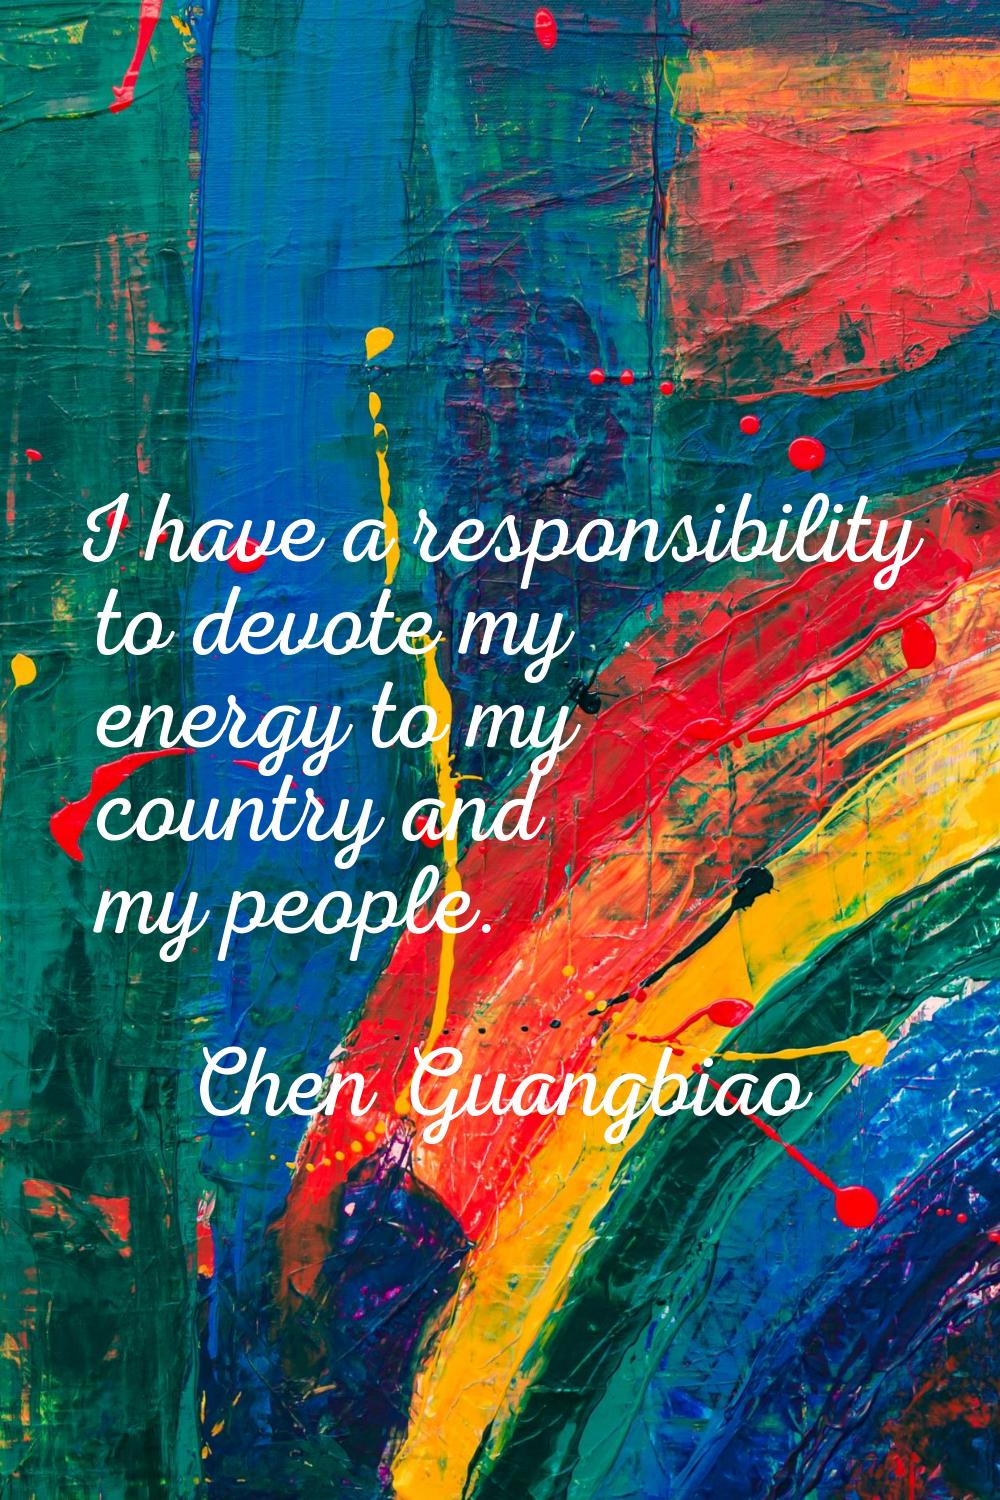 I have a responsibility to devote my energy to my country and my people.